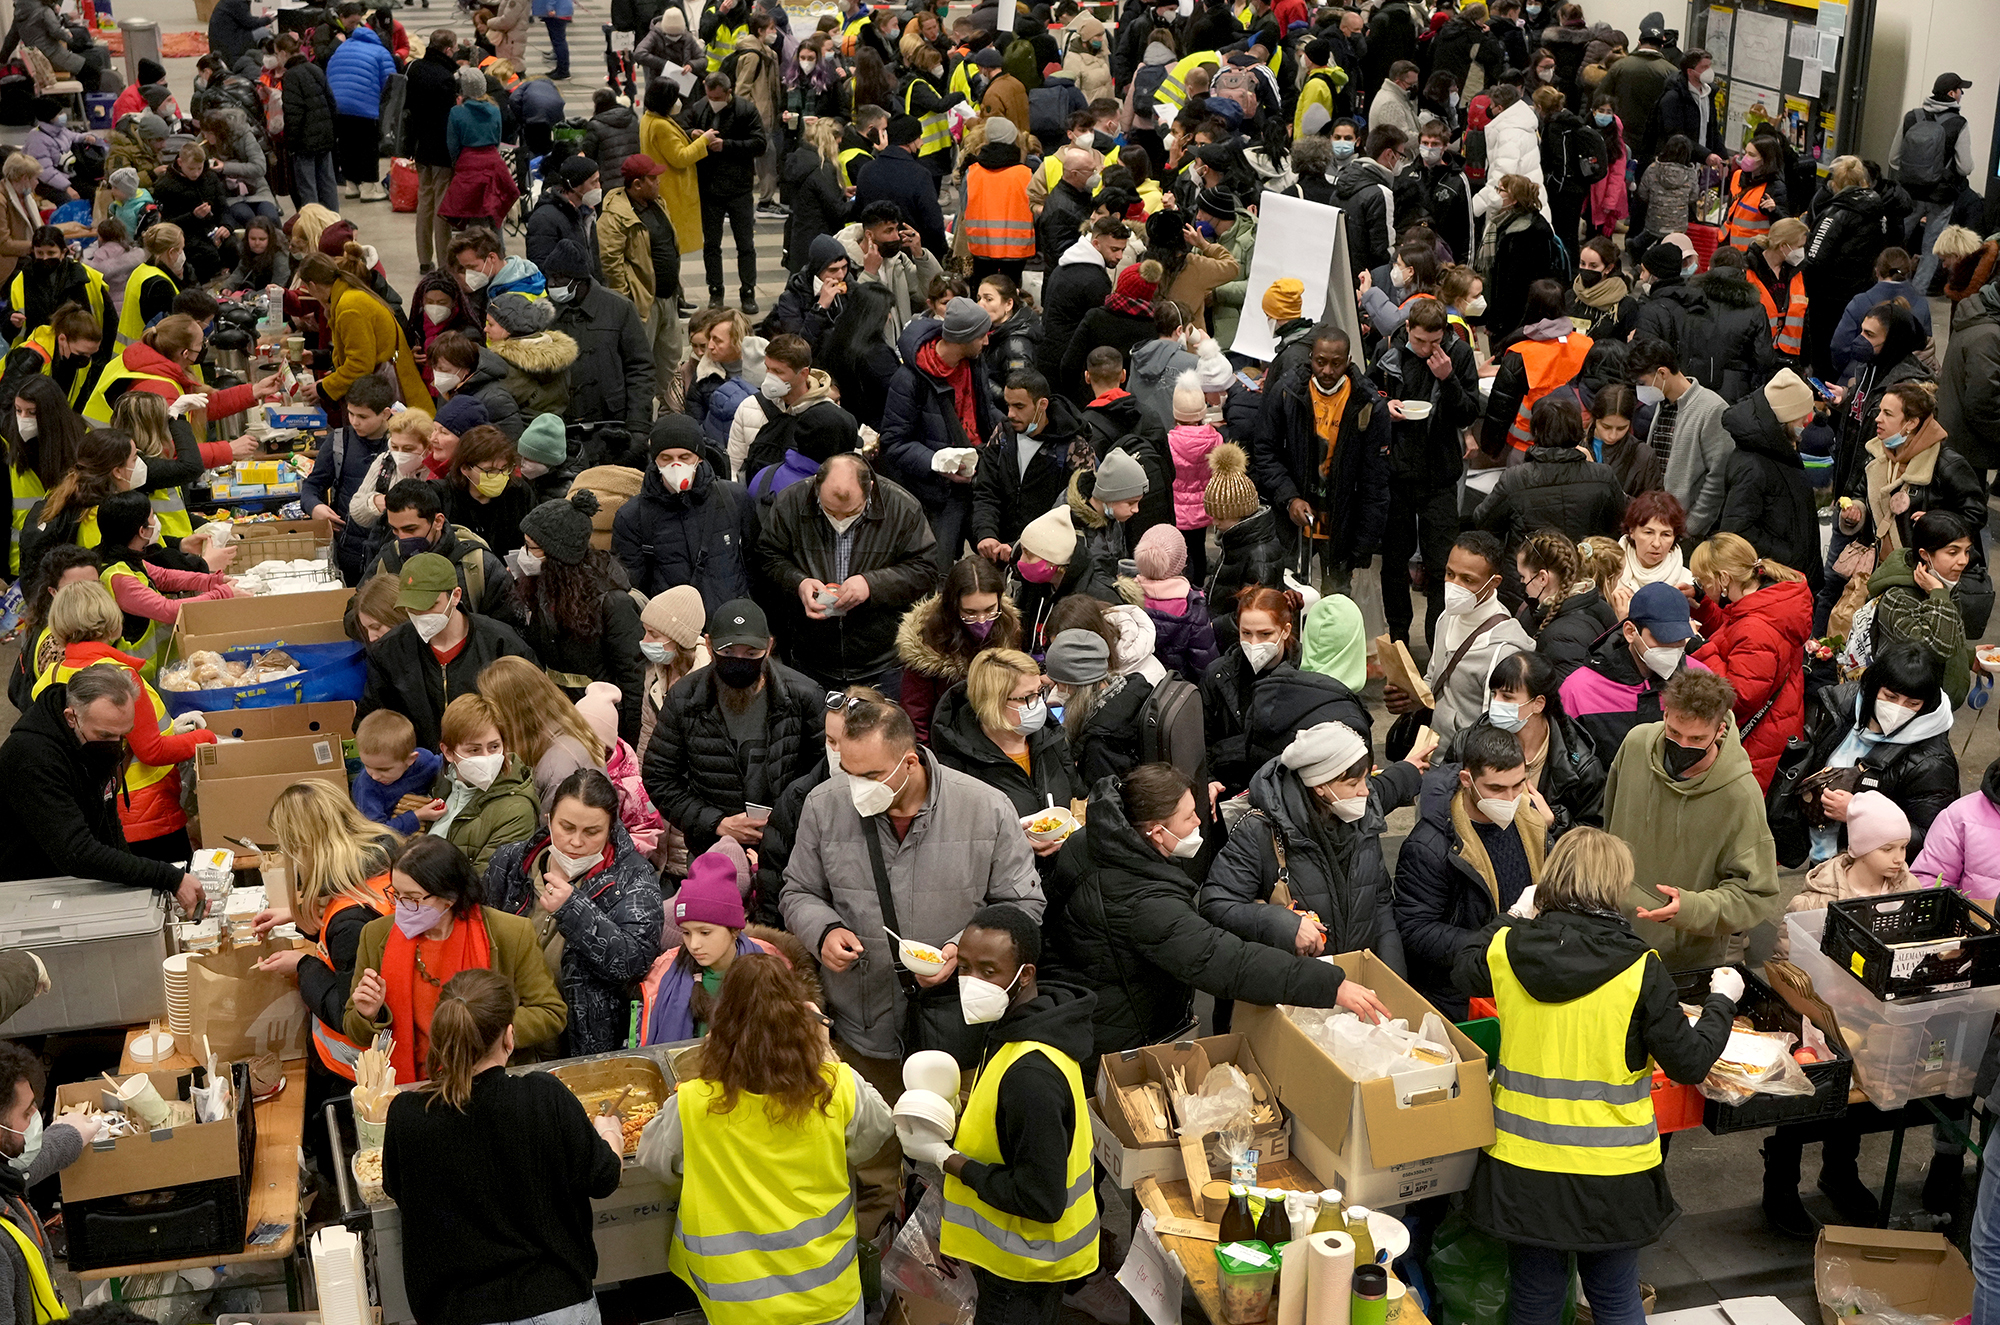 Ukrainian refugees queue for food after their arrival at the main train station in Berlin, Germany on March 8. 